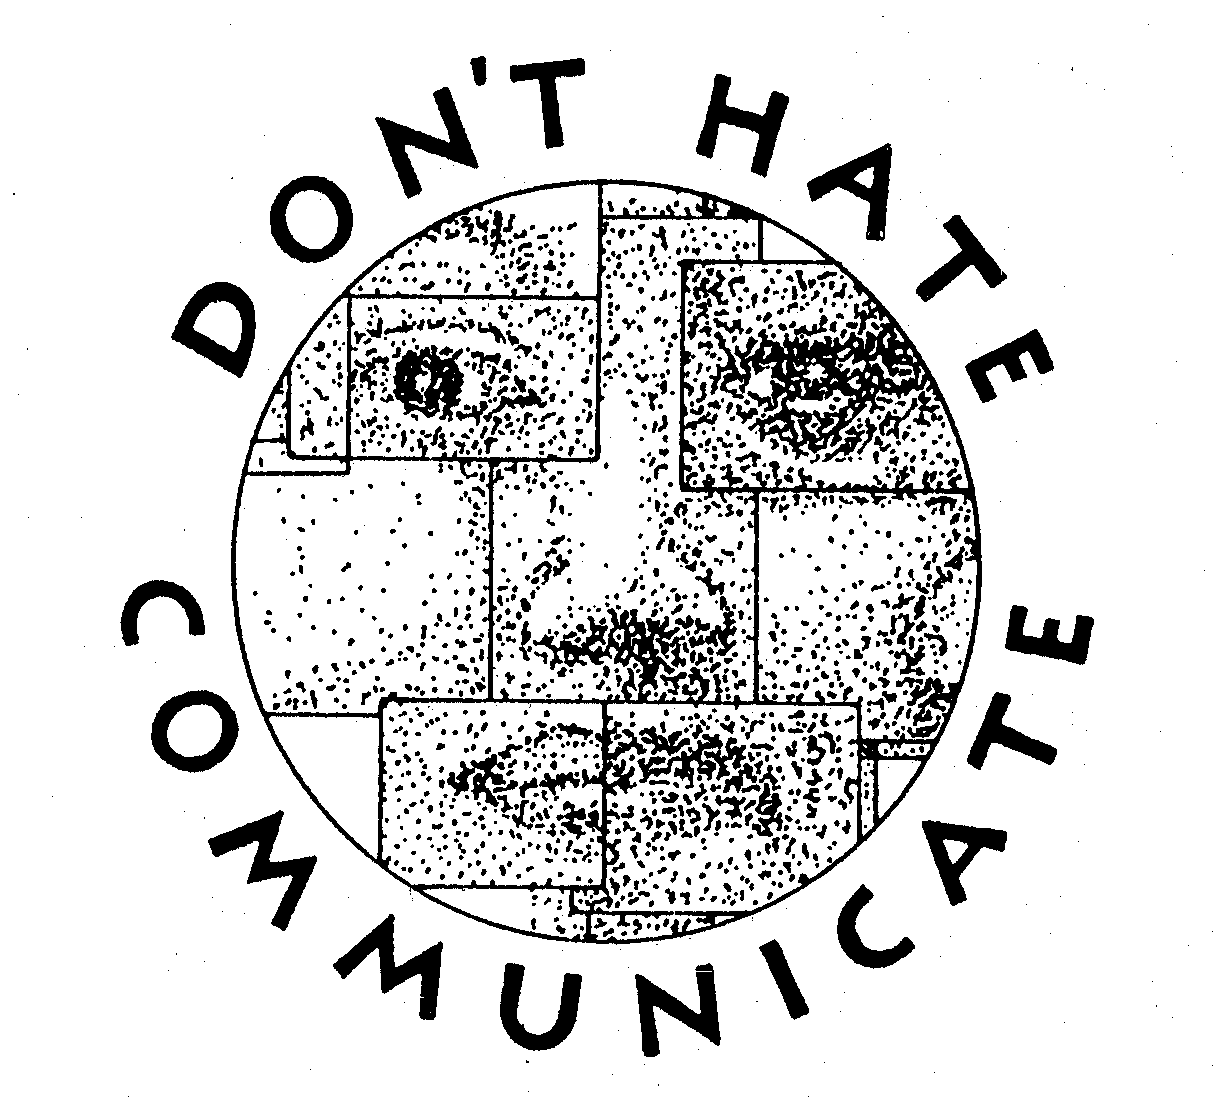  DON'T HATE COMMUNICATE